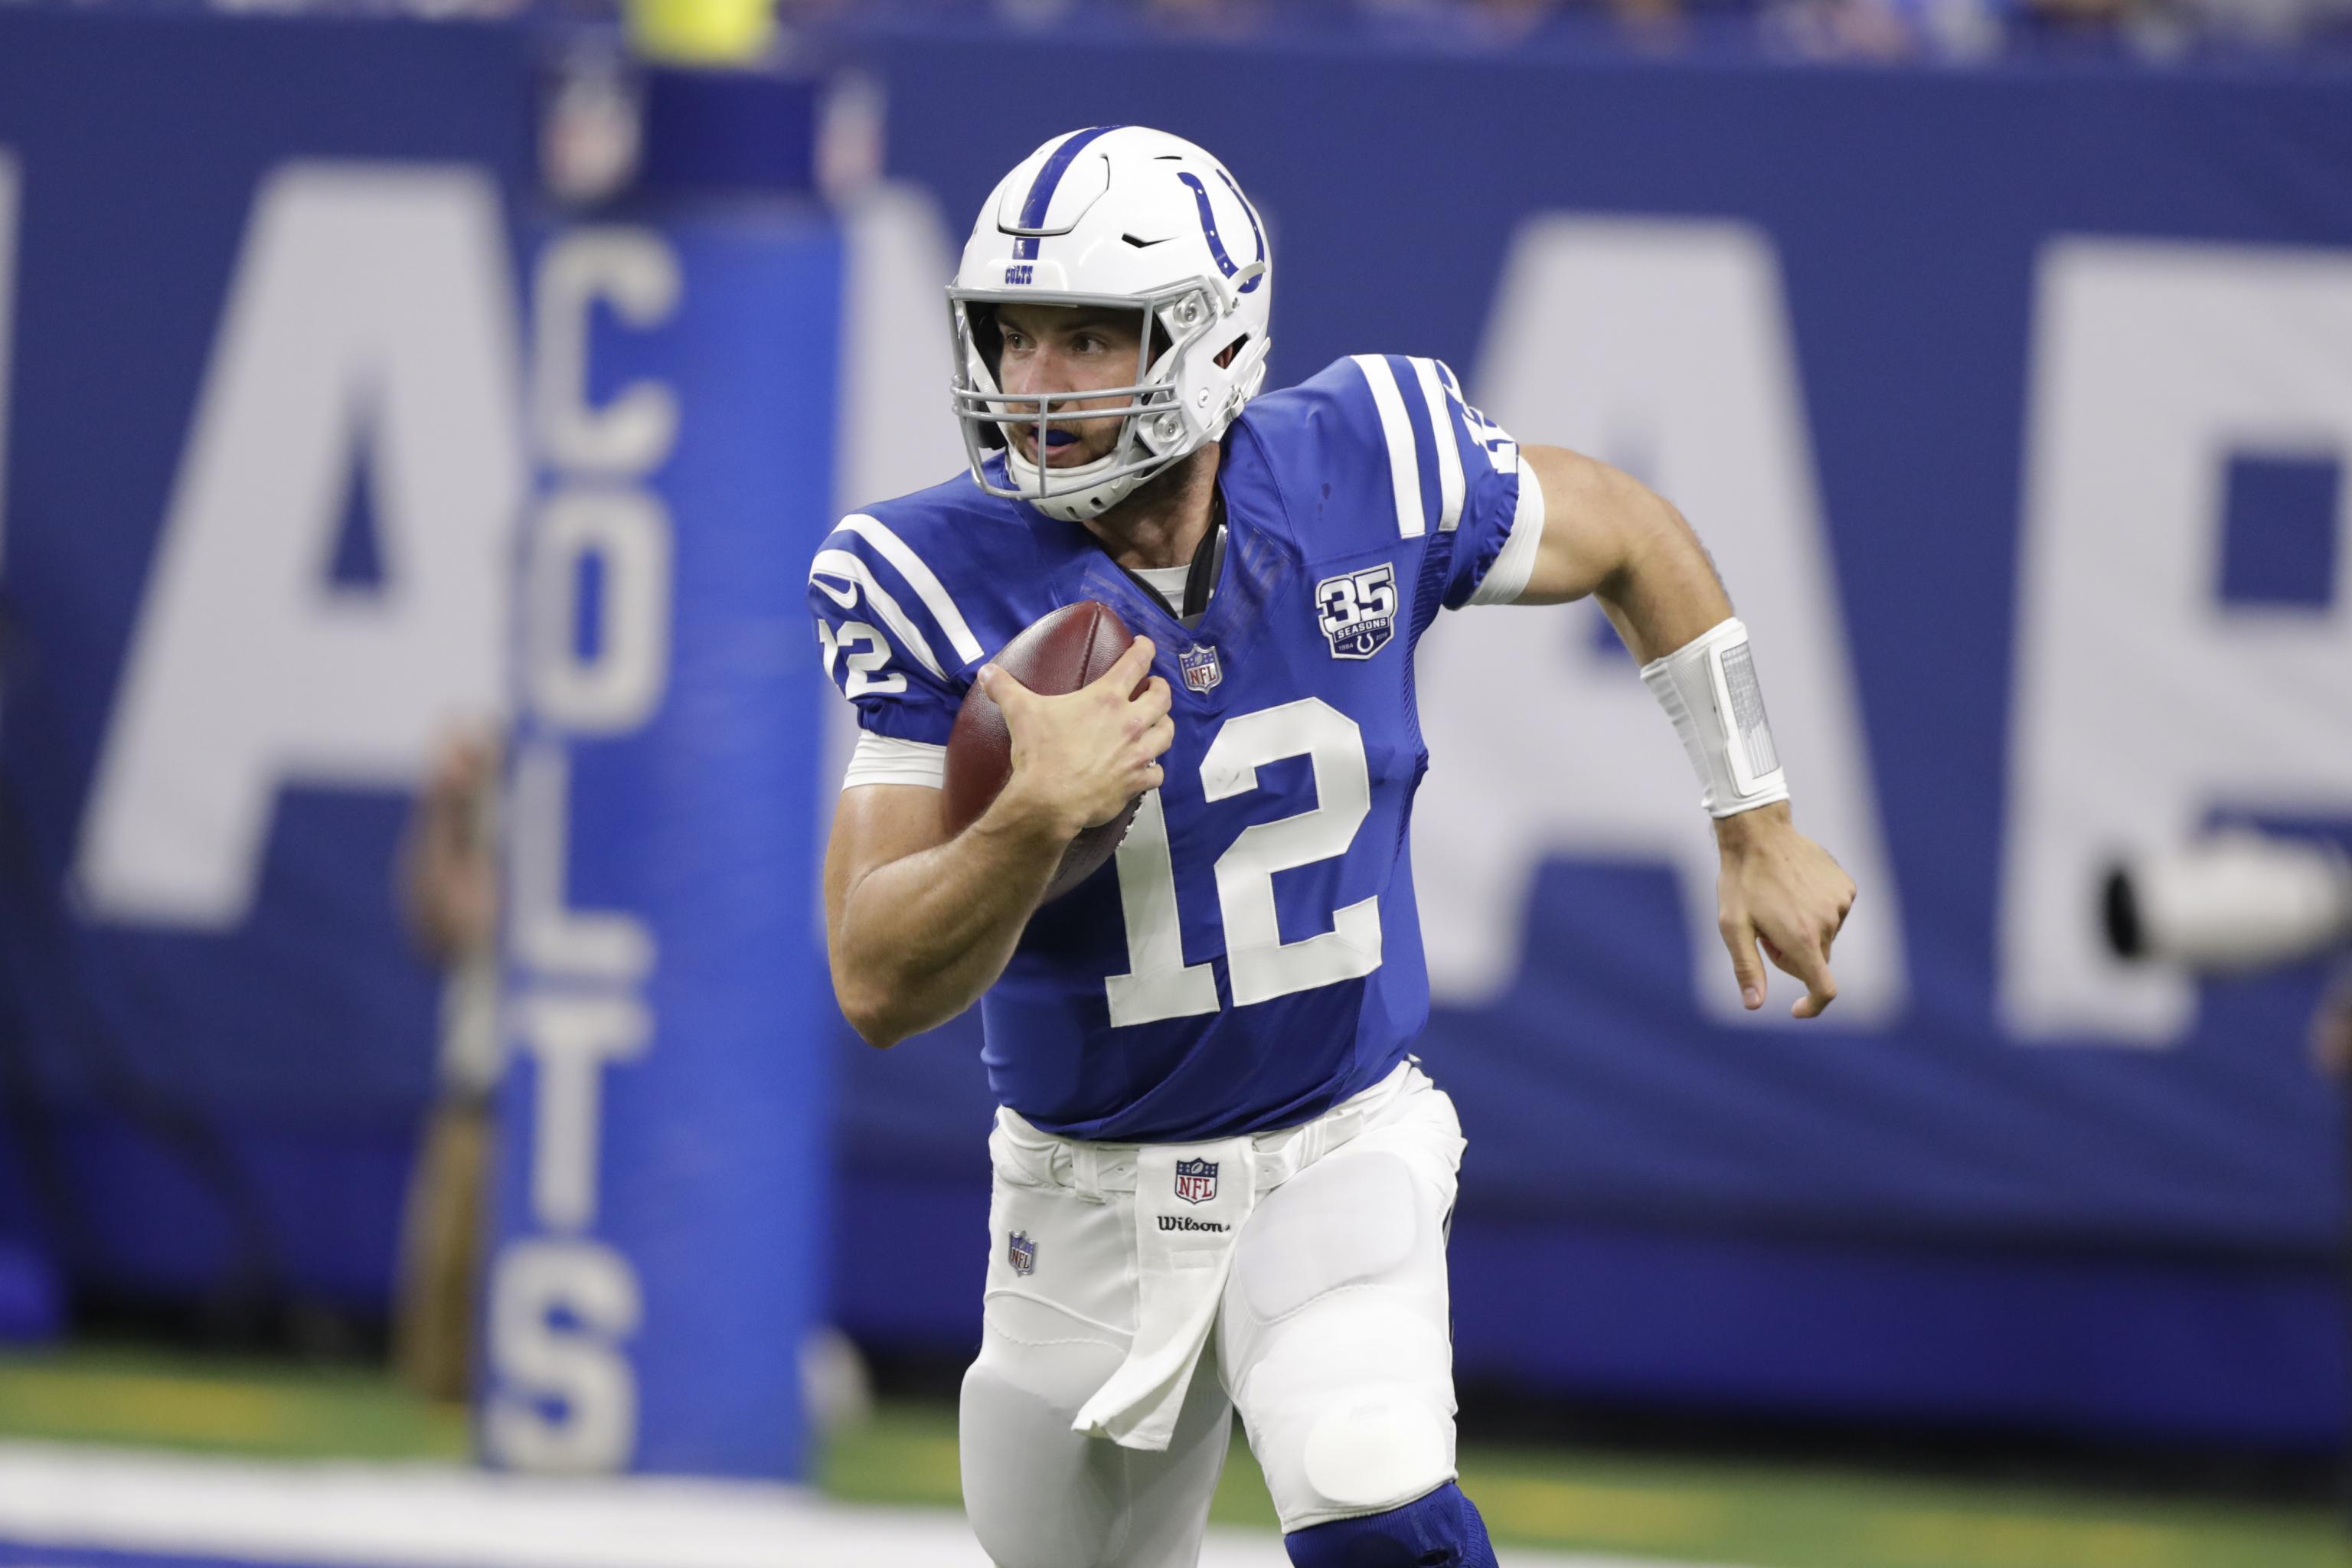 Andrew Luck Injury Growing More Worrisome As NFL Season Approaches